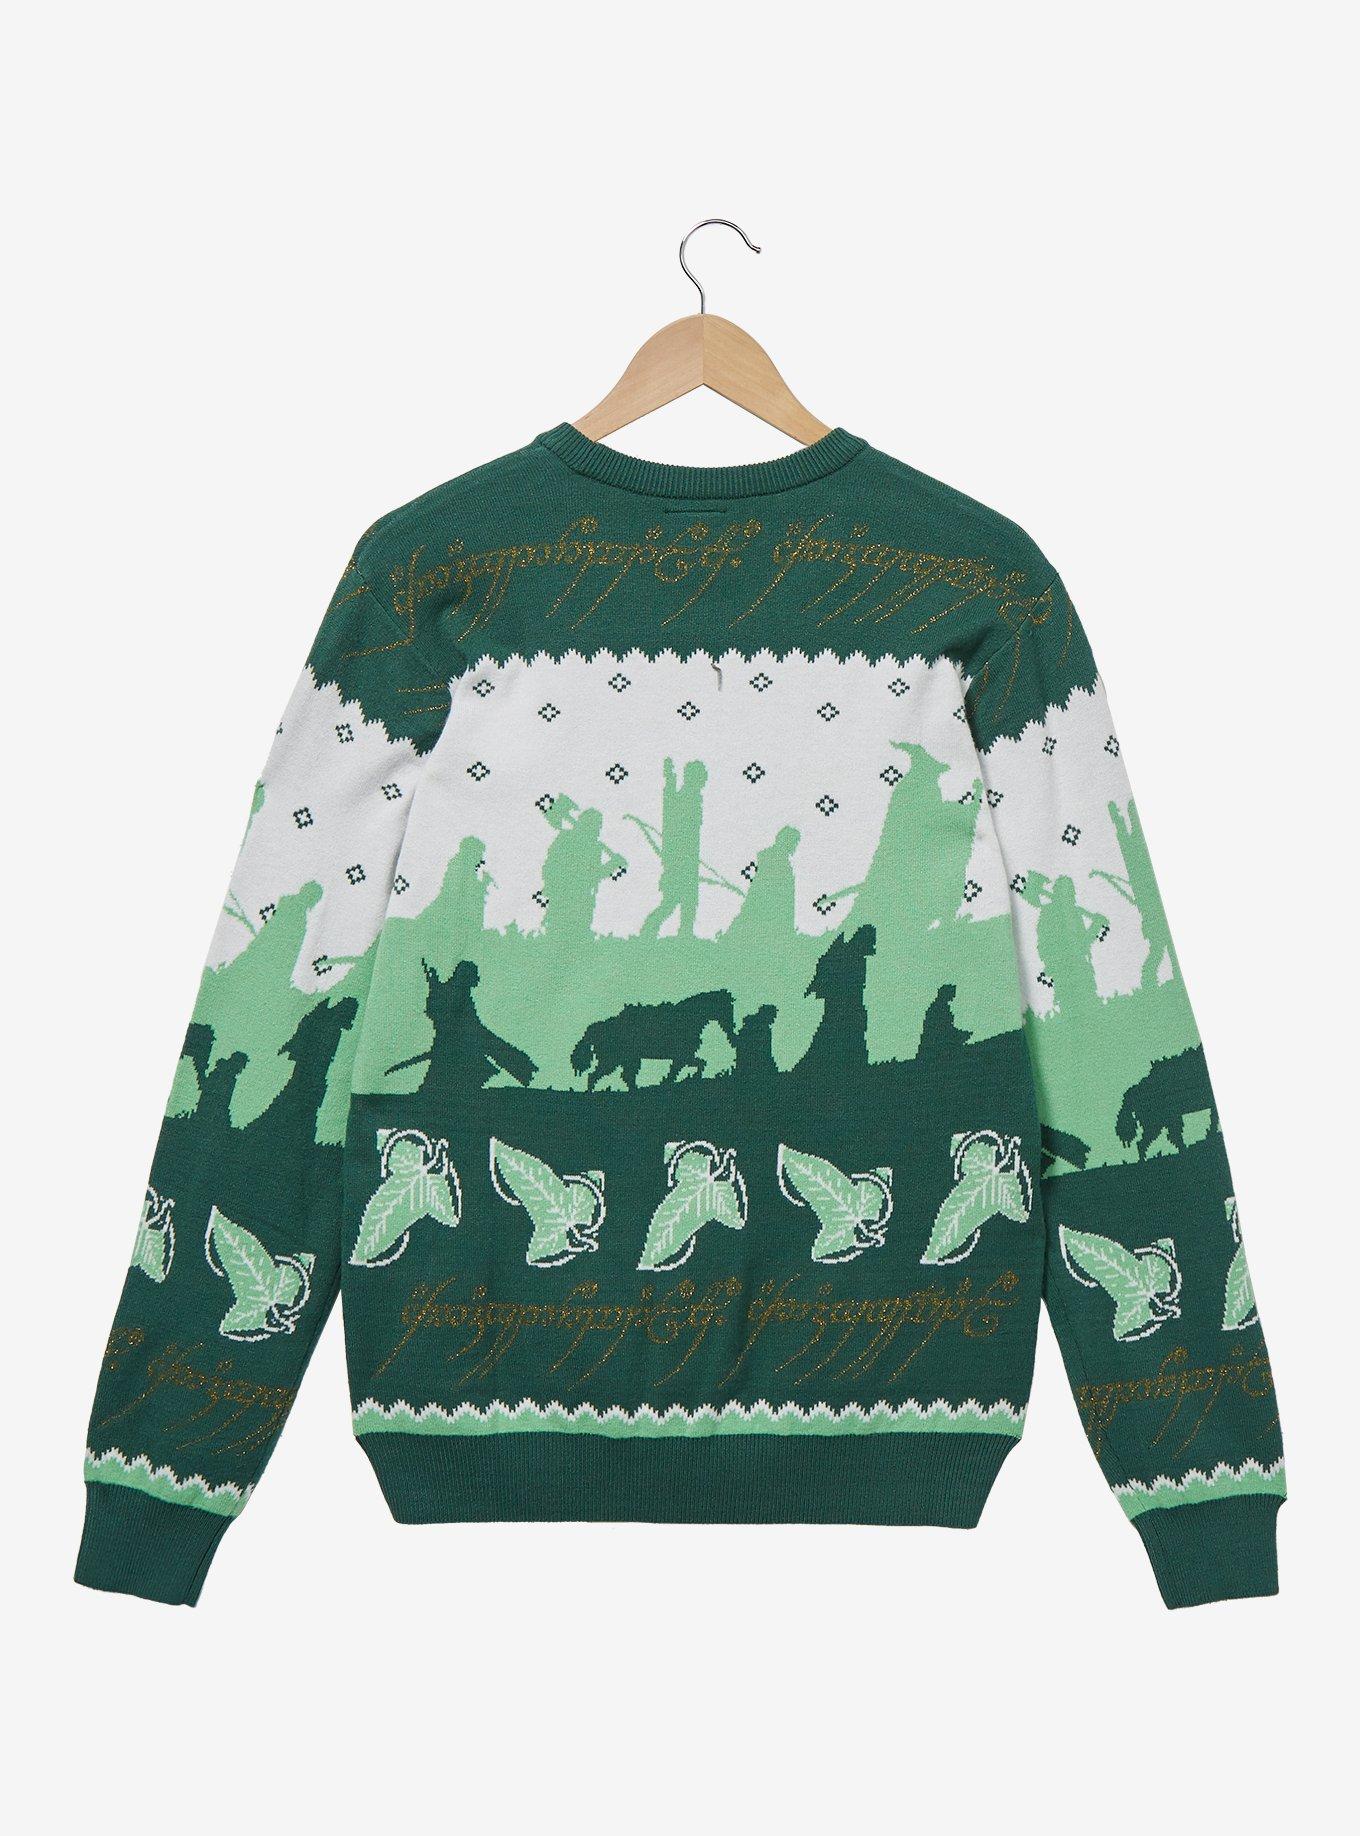 The Lord of the Rings Fellowship Silhouettes Holiday Sweater - BoxLunch Exclusive, GREEN, alternate